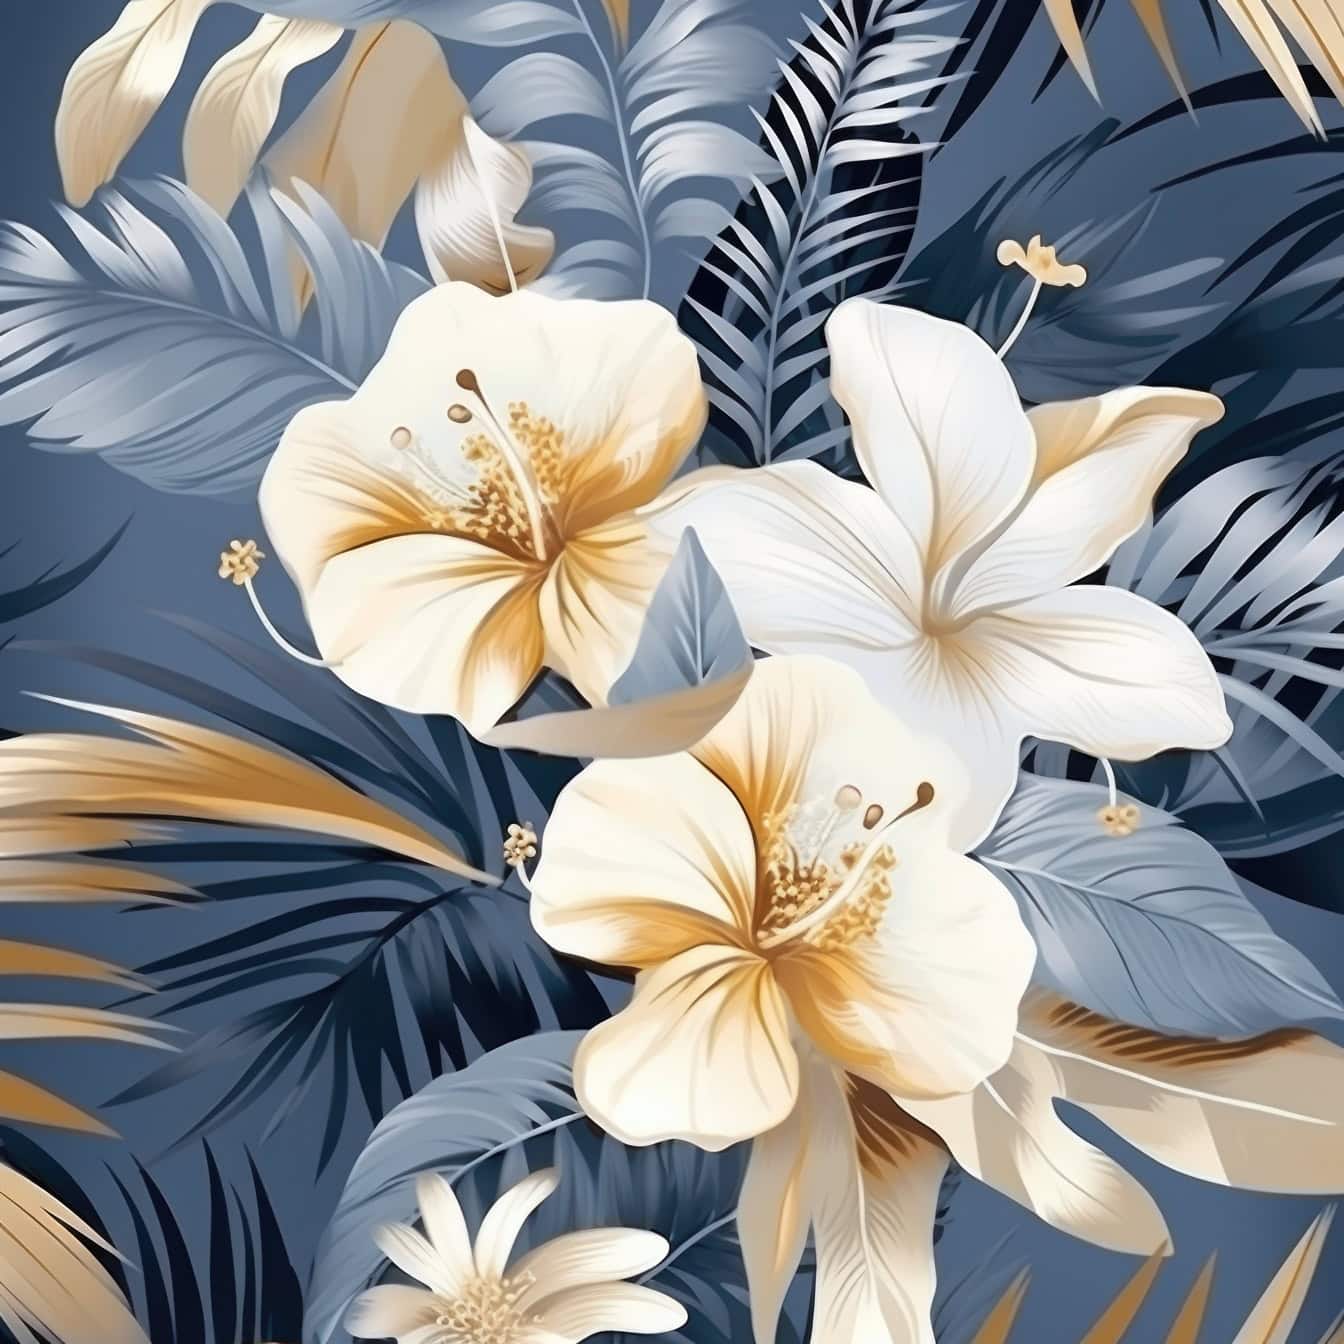 Floral graphic illustration of flowers and leaves in pastel blue and yellowish tones